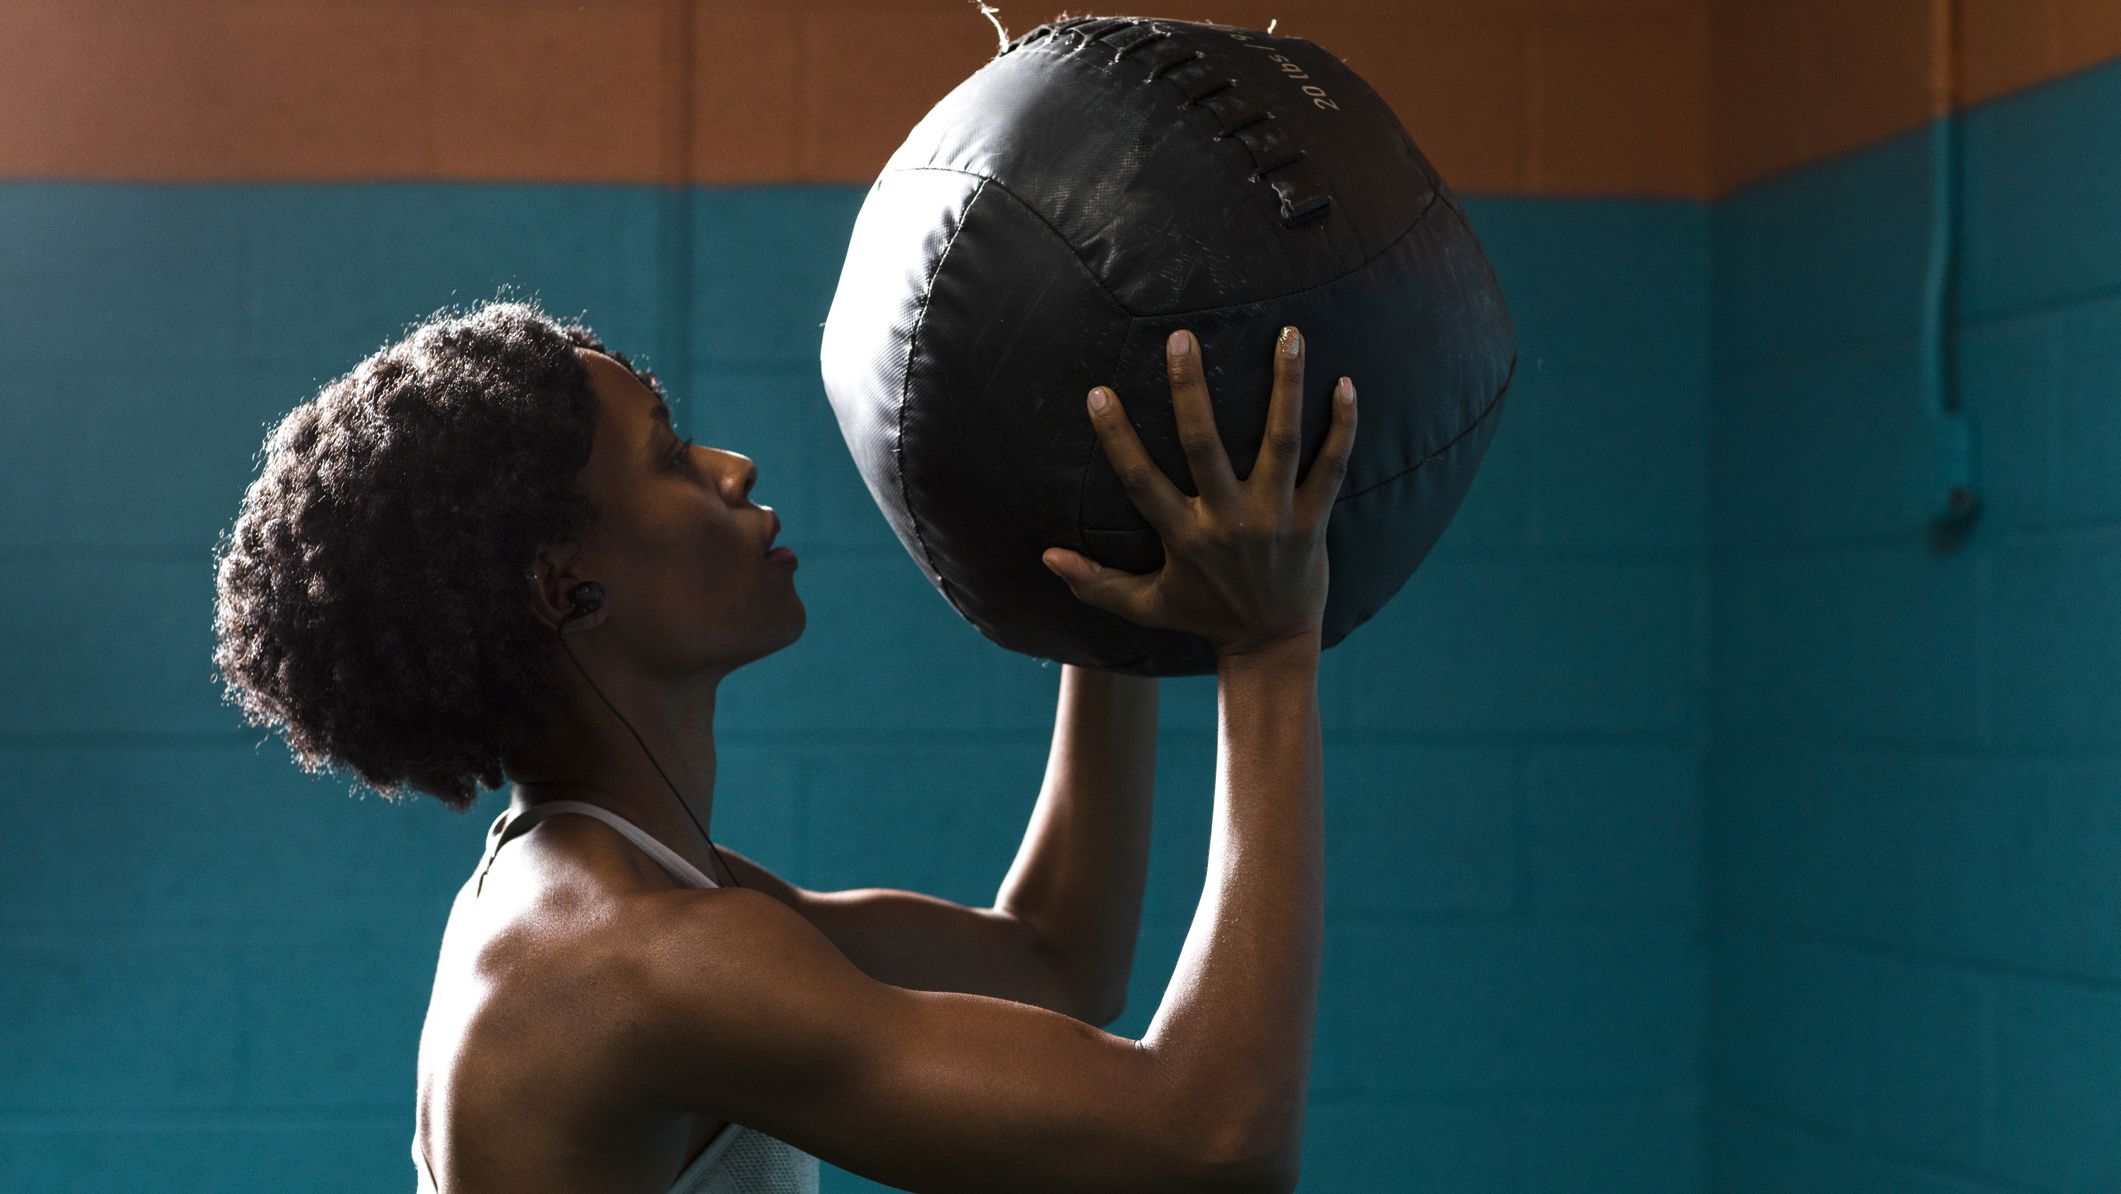 https://hips.hearstapps.com/hmg-prod/images/side-view-of-woman-holding-medicine-ball-while-royalty-free-image-1689786365.jpg?crop=1xw:0.84415xh;center,top